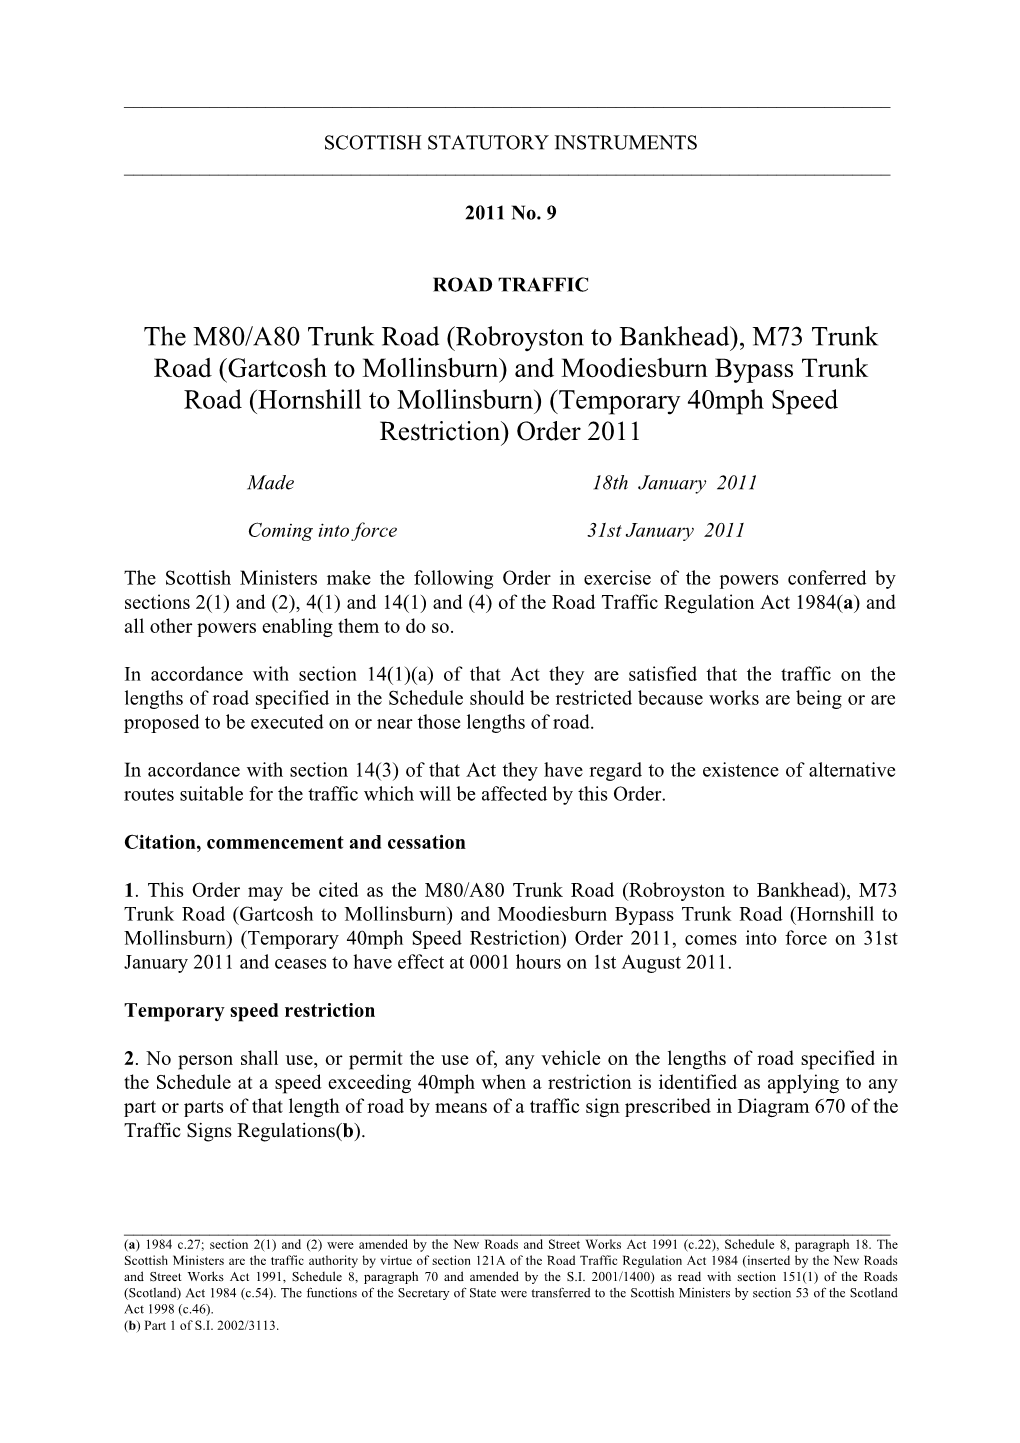 And Moodiesburn Bypass Trunk Road (Hornshill to Mollinsburn) (Temporary 40Mph Speed Restriction) Order 2011